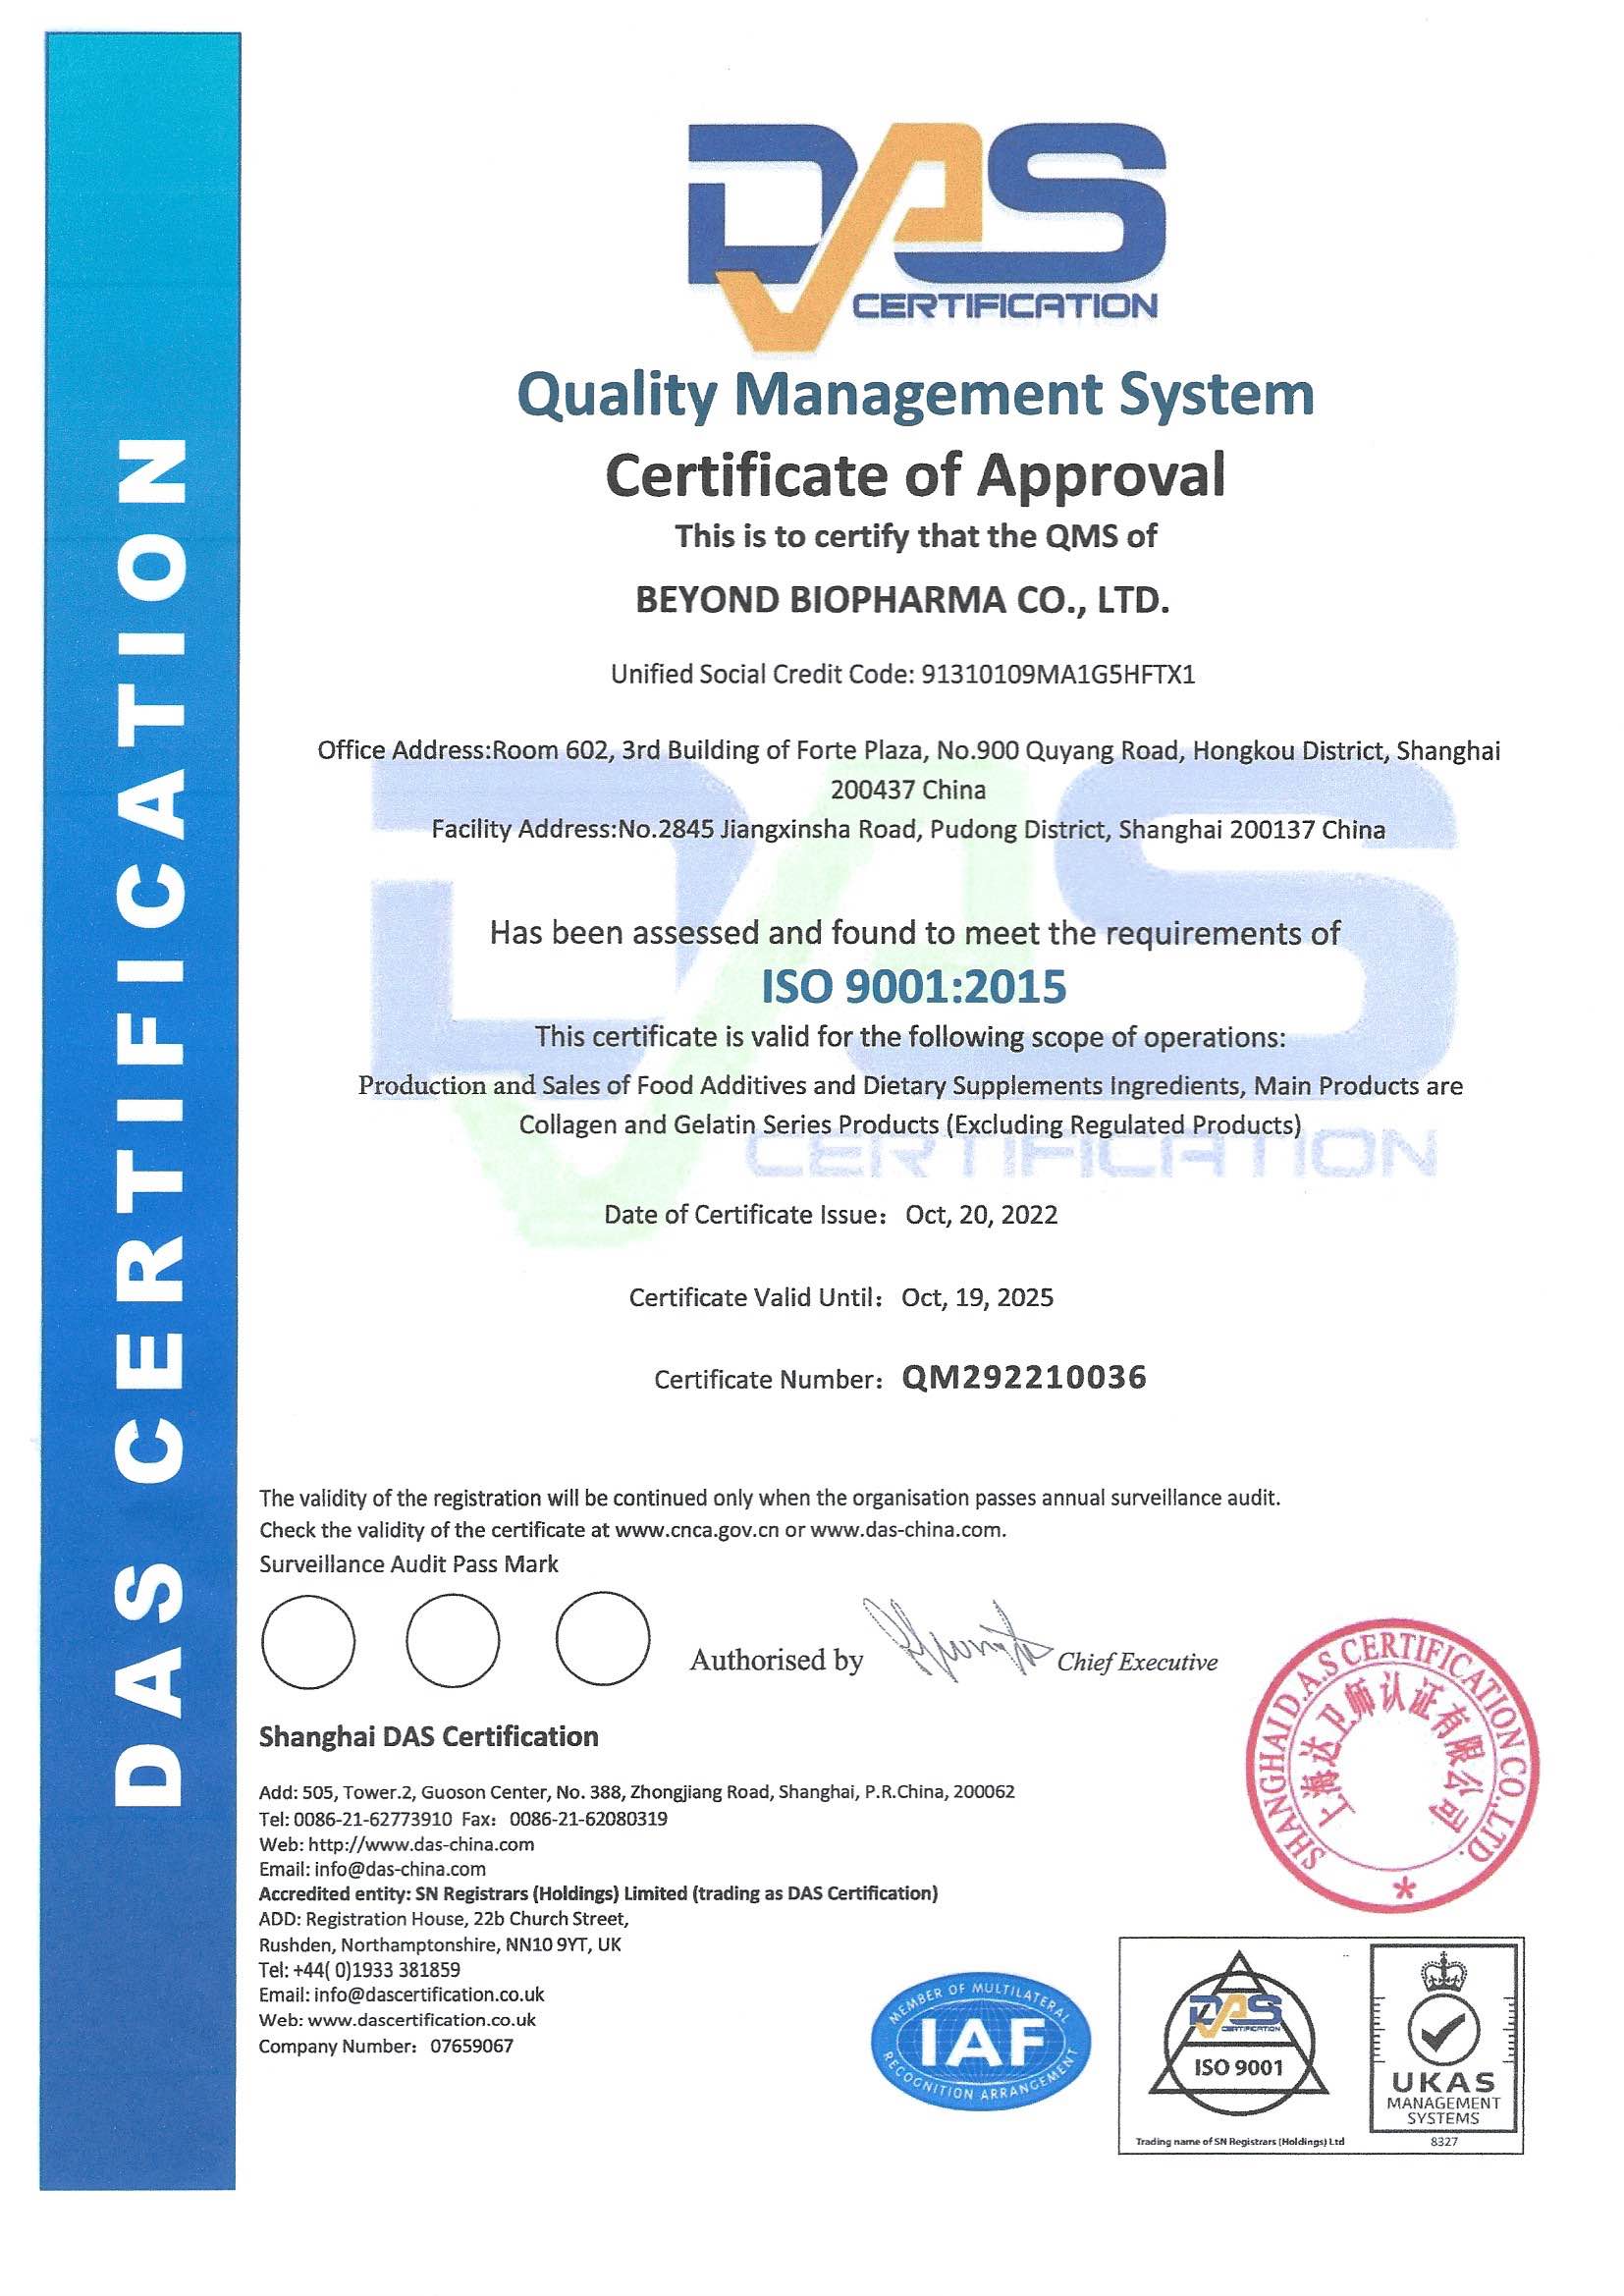 Congratulate our company successfully upgrade ISO 9001:2015 quality management system certificati...